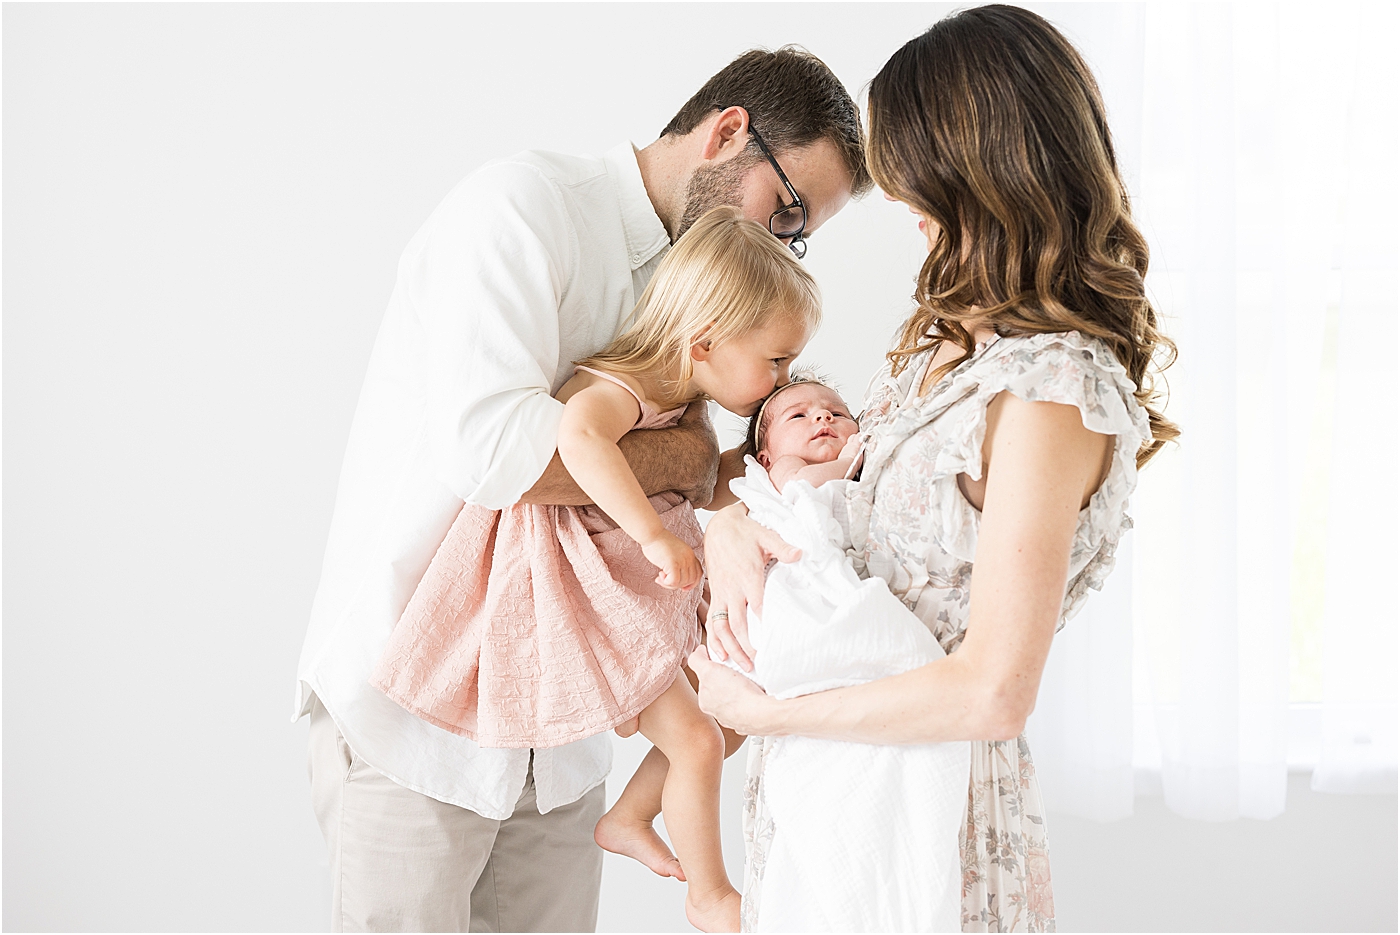 Family of four in studio for newborn photos with Fishers newborn baby photographer, Lindsay Konopa Photography.